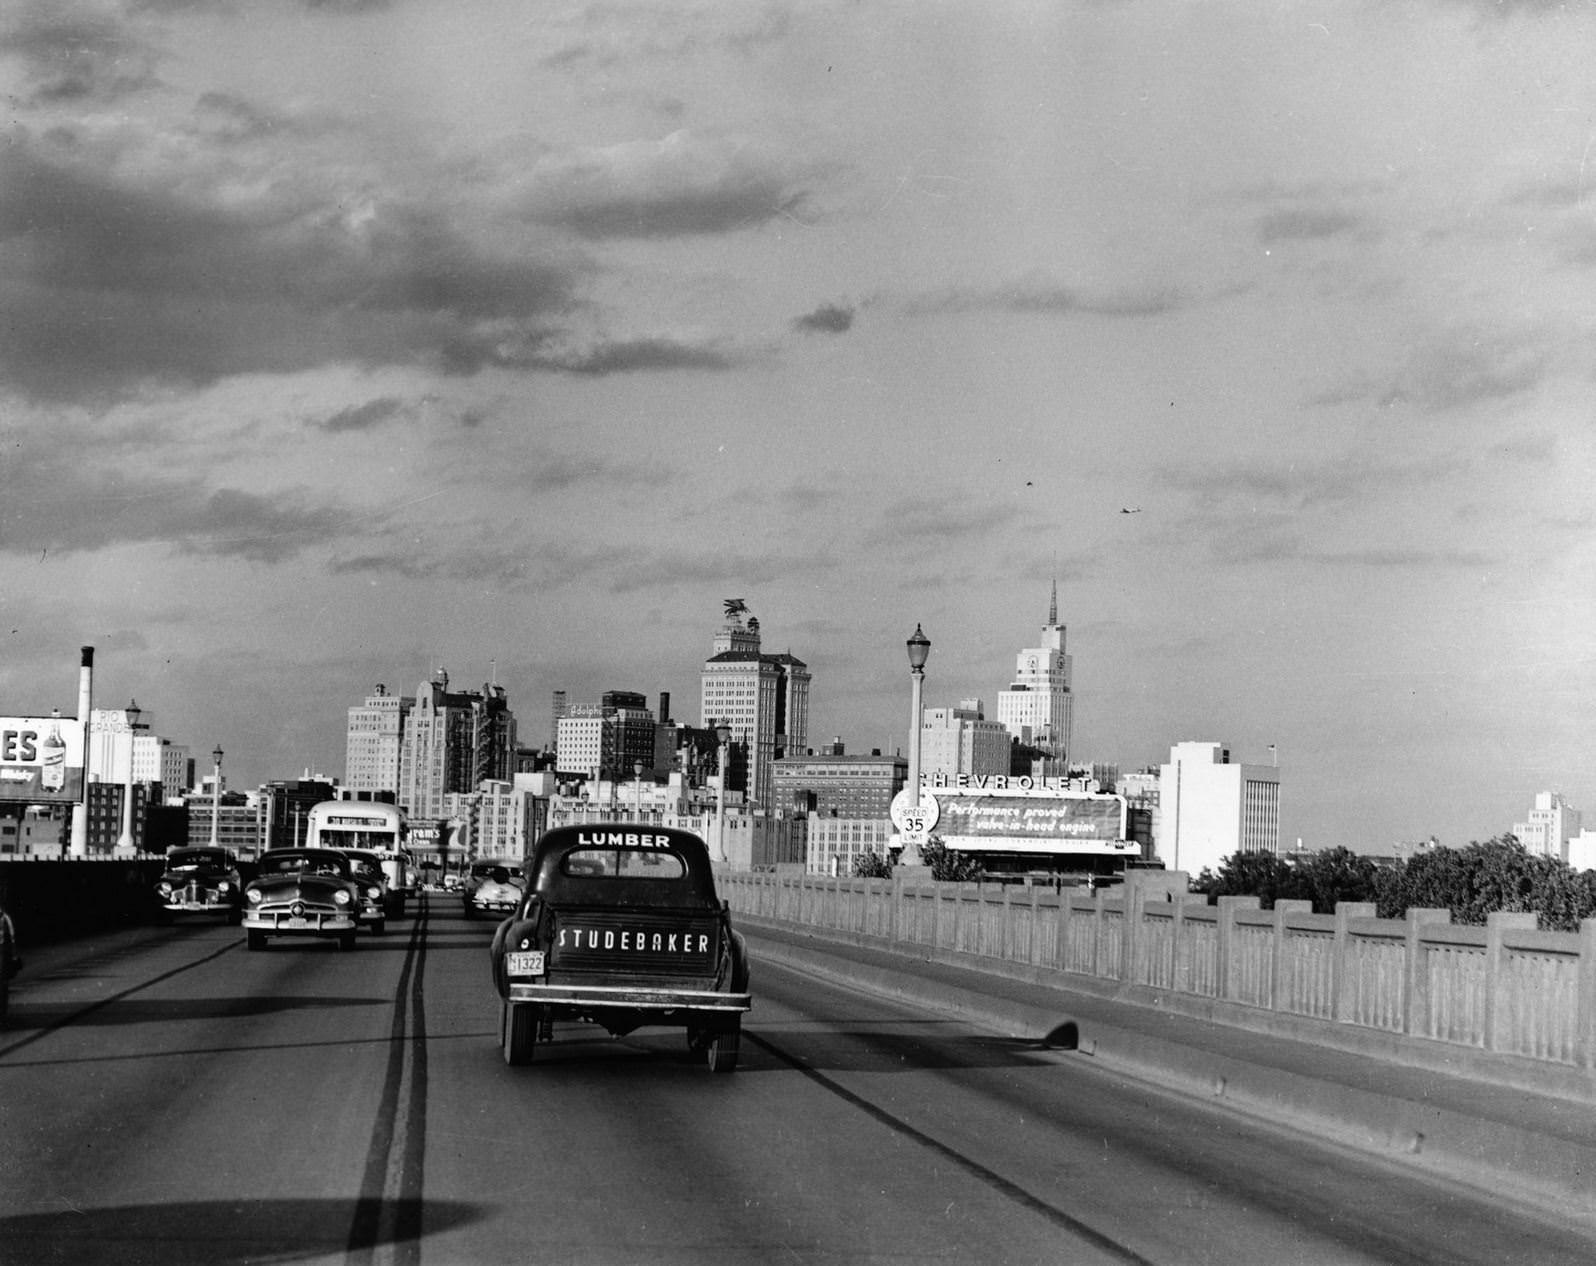 Dallas downtown skyline from Commerce Street bridge with Studebaker truck in foreground, 1951